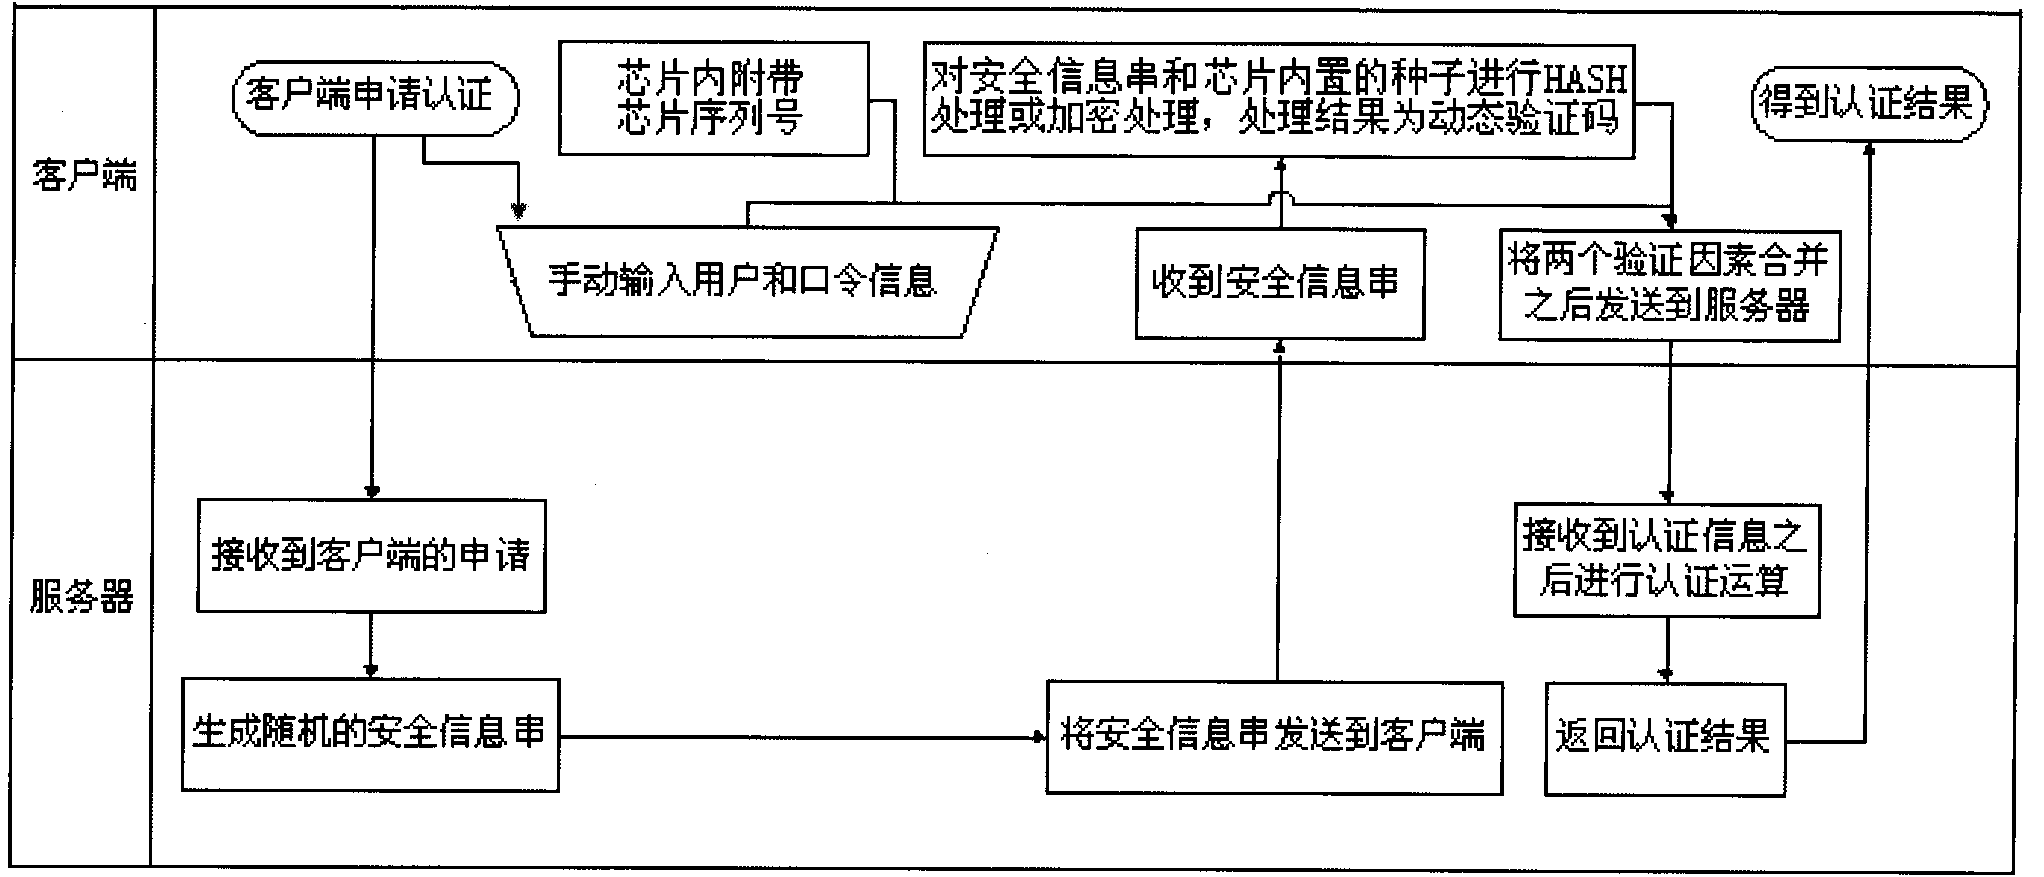 Dual-factor authentication method based on HASH chip or encryption chip